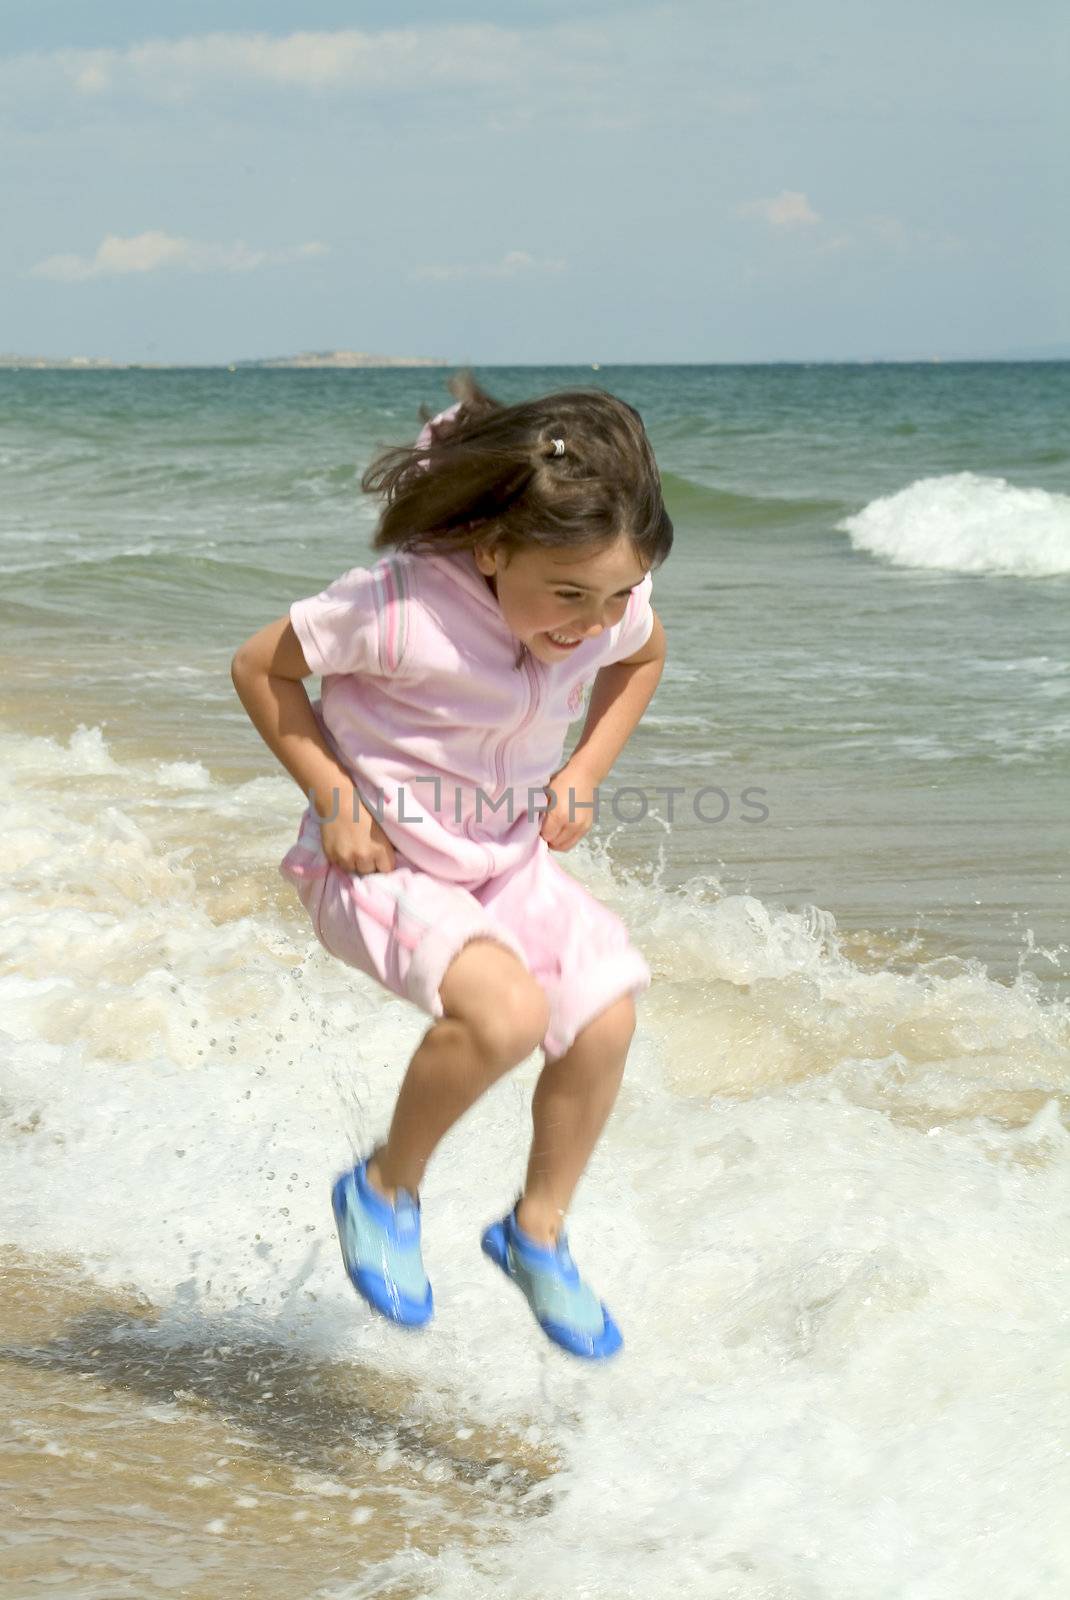 A LITTLE GIRL JUMPING OVER WAVES WHILE EXPRESSING EXCITEMENT AND JOY AT BEING IN THE WARMTH OF SUMMER ON THE BEACH BY THE SEASIDE AVOIDING GETTING WET AND GETTING SOME EXERCISE WHILE HAVING FUN AT THE EDGE OF THE SEA  